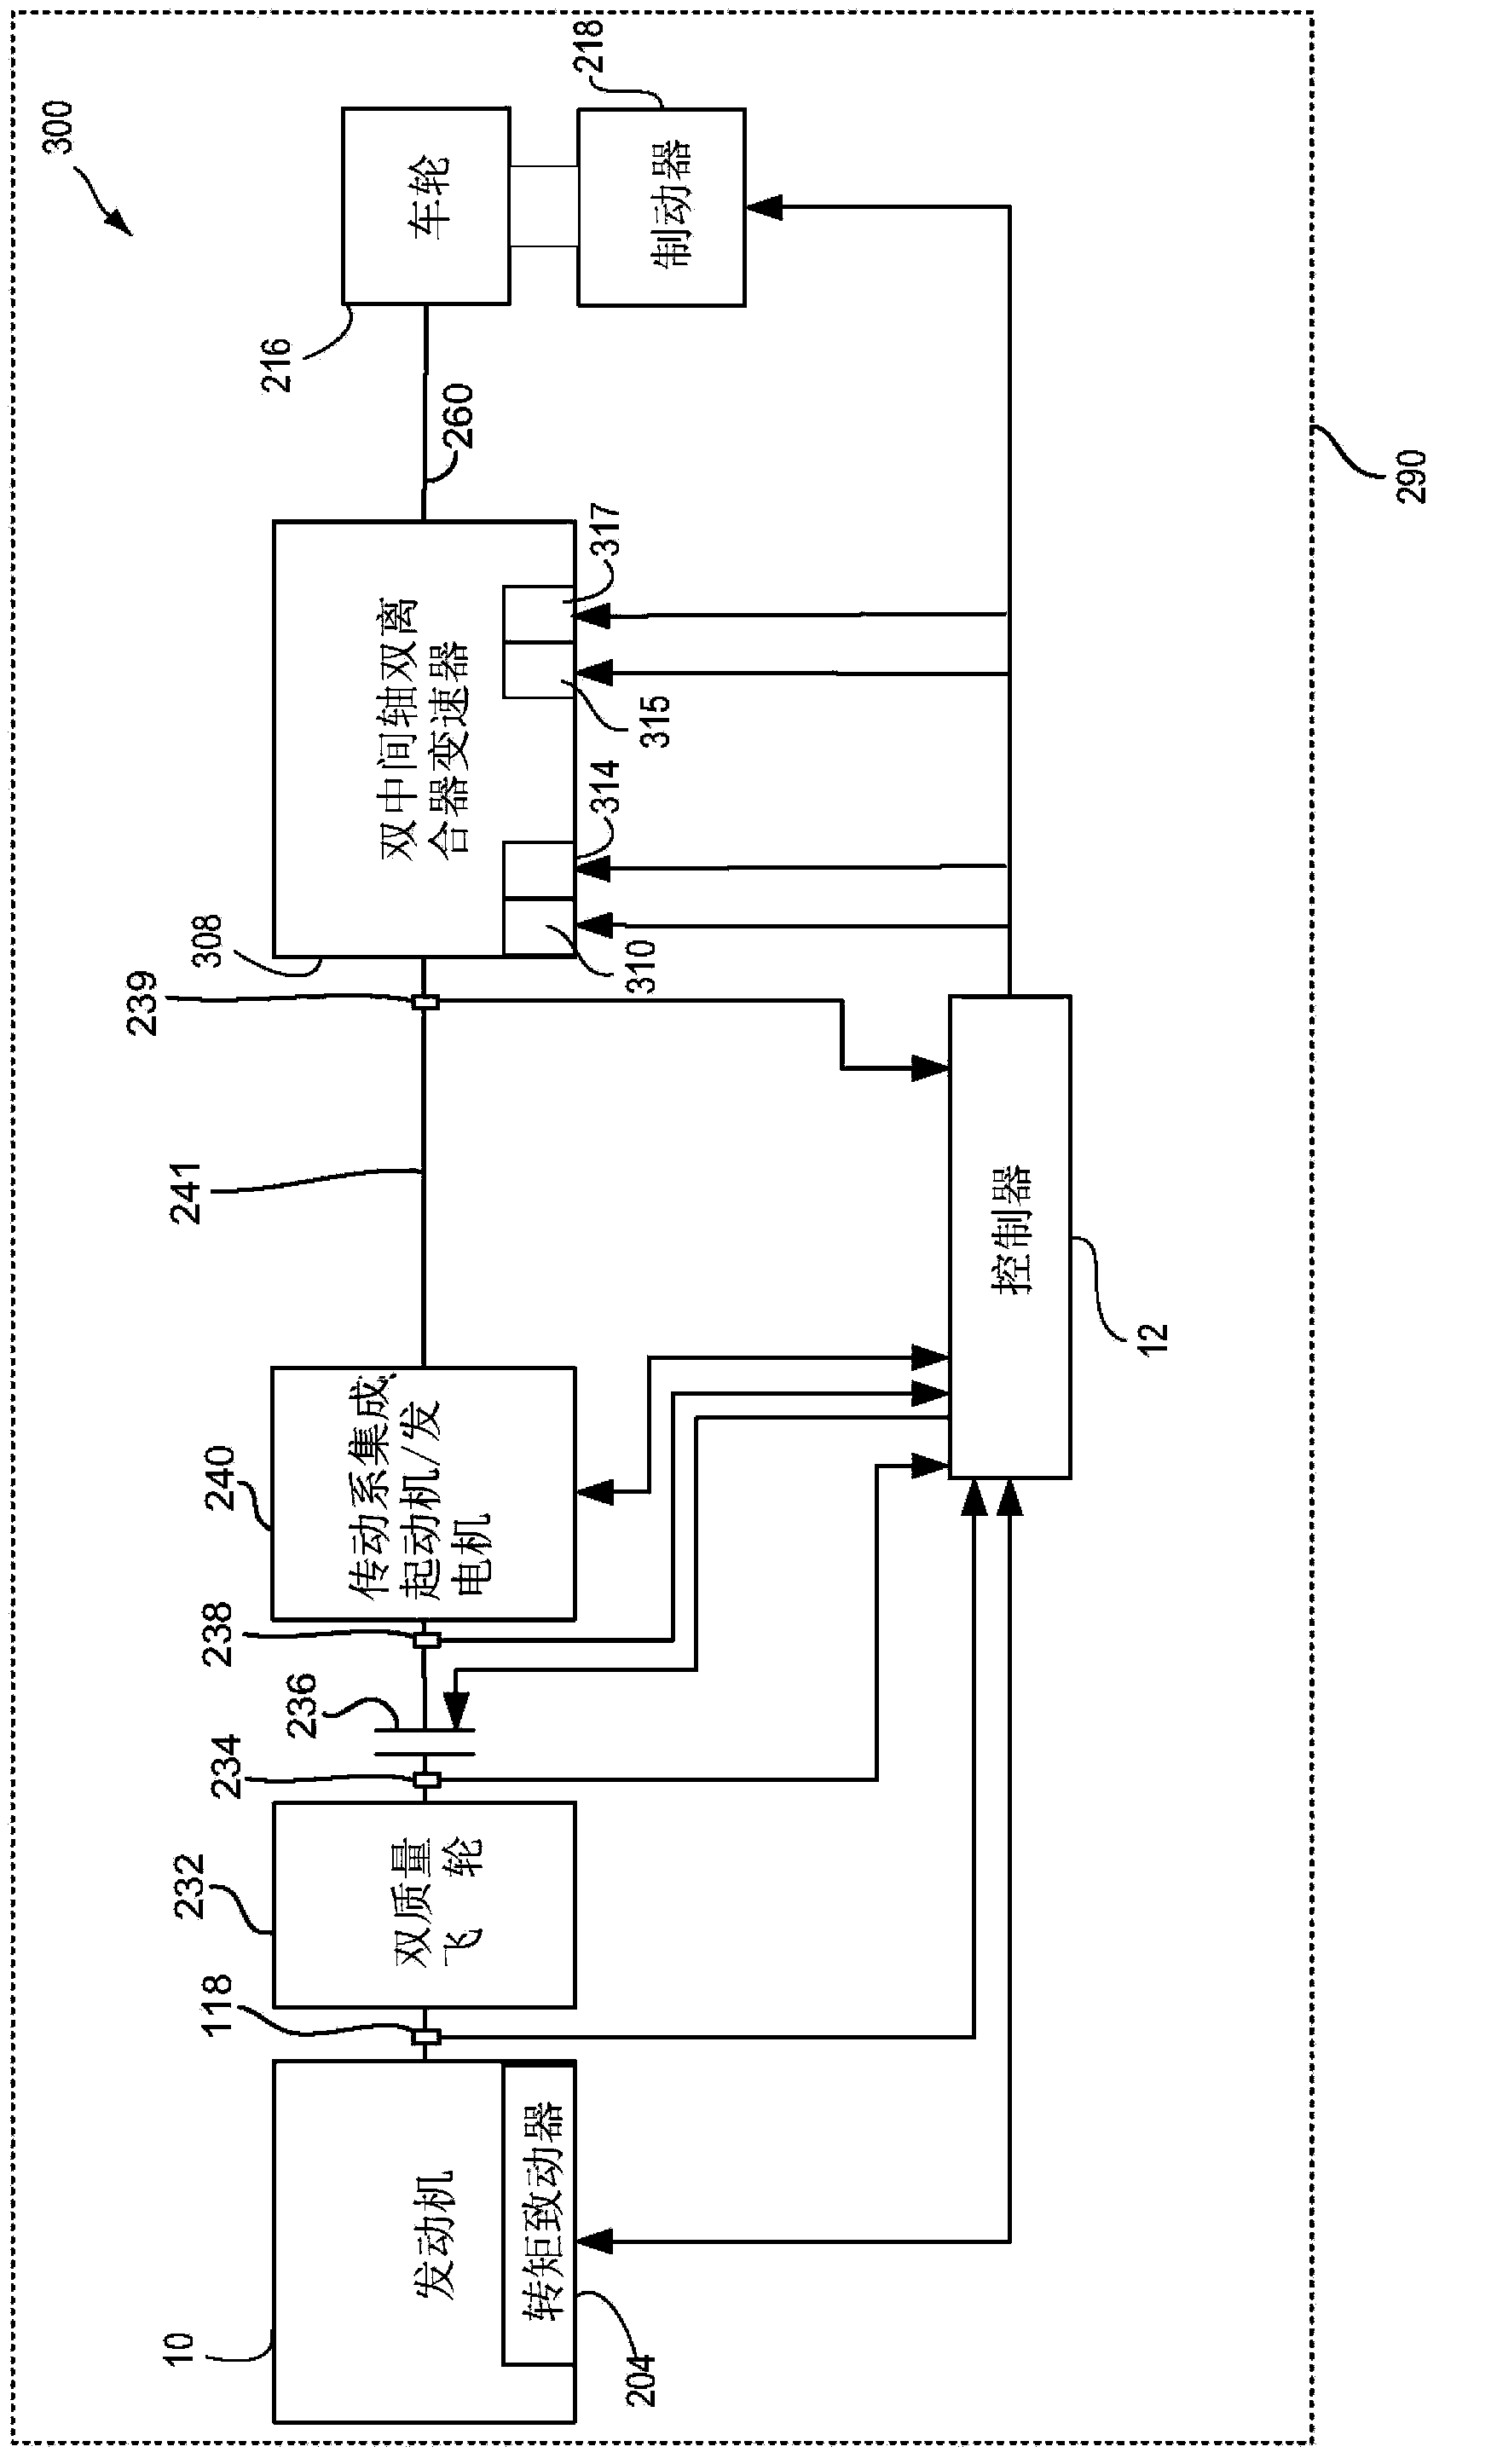 A method and a system for adaptive change of transfer functions of a power train disconnect-type clutch